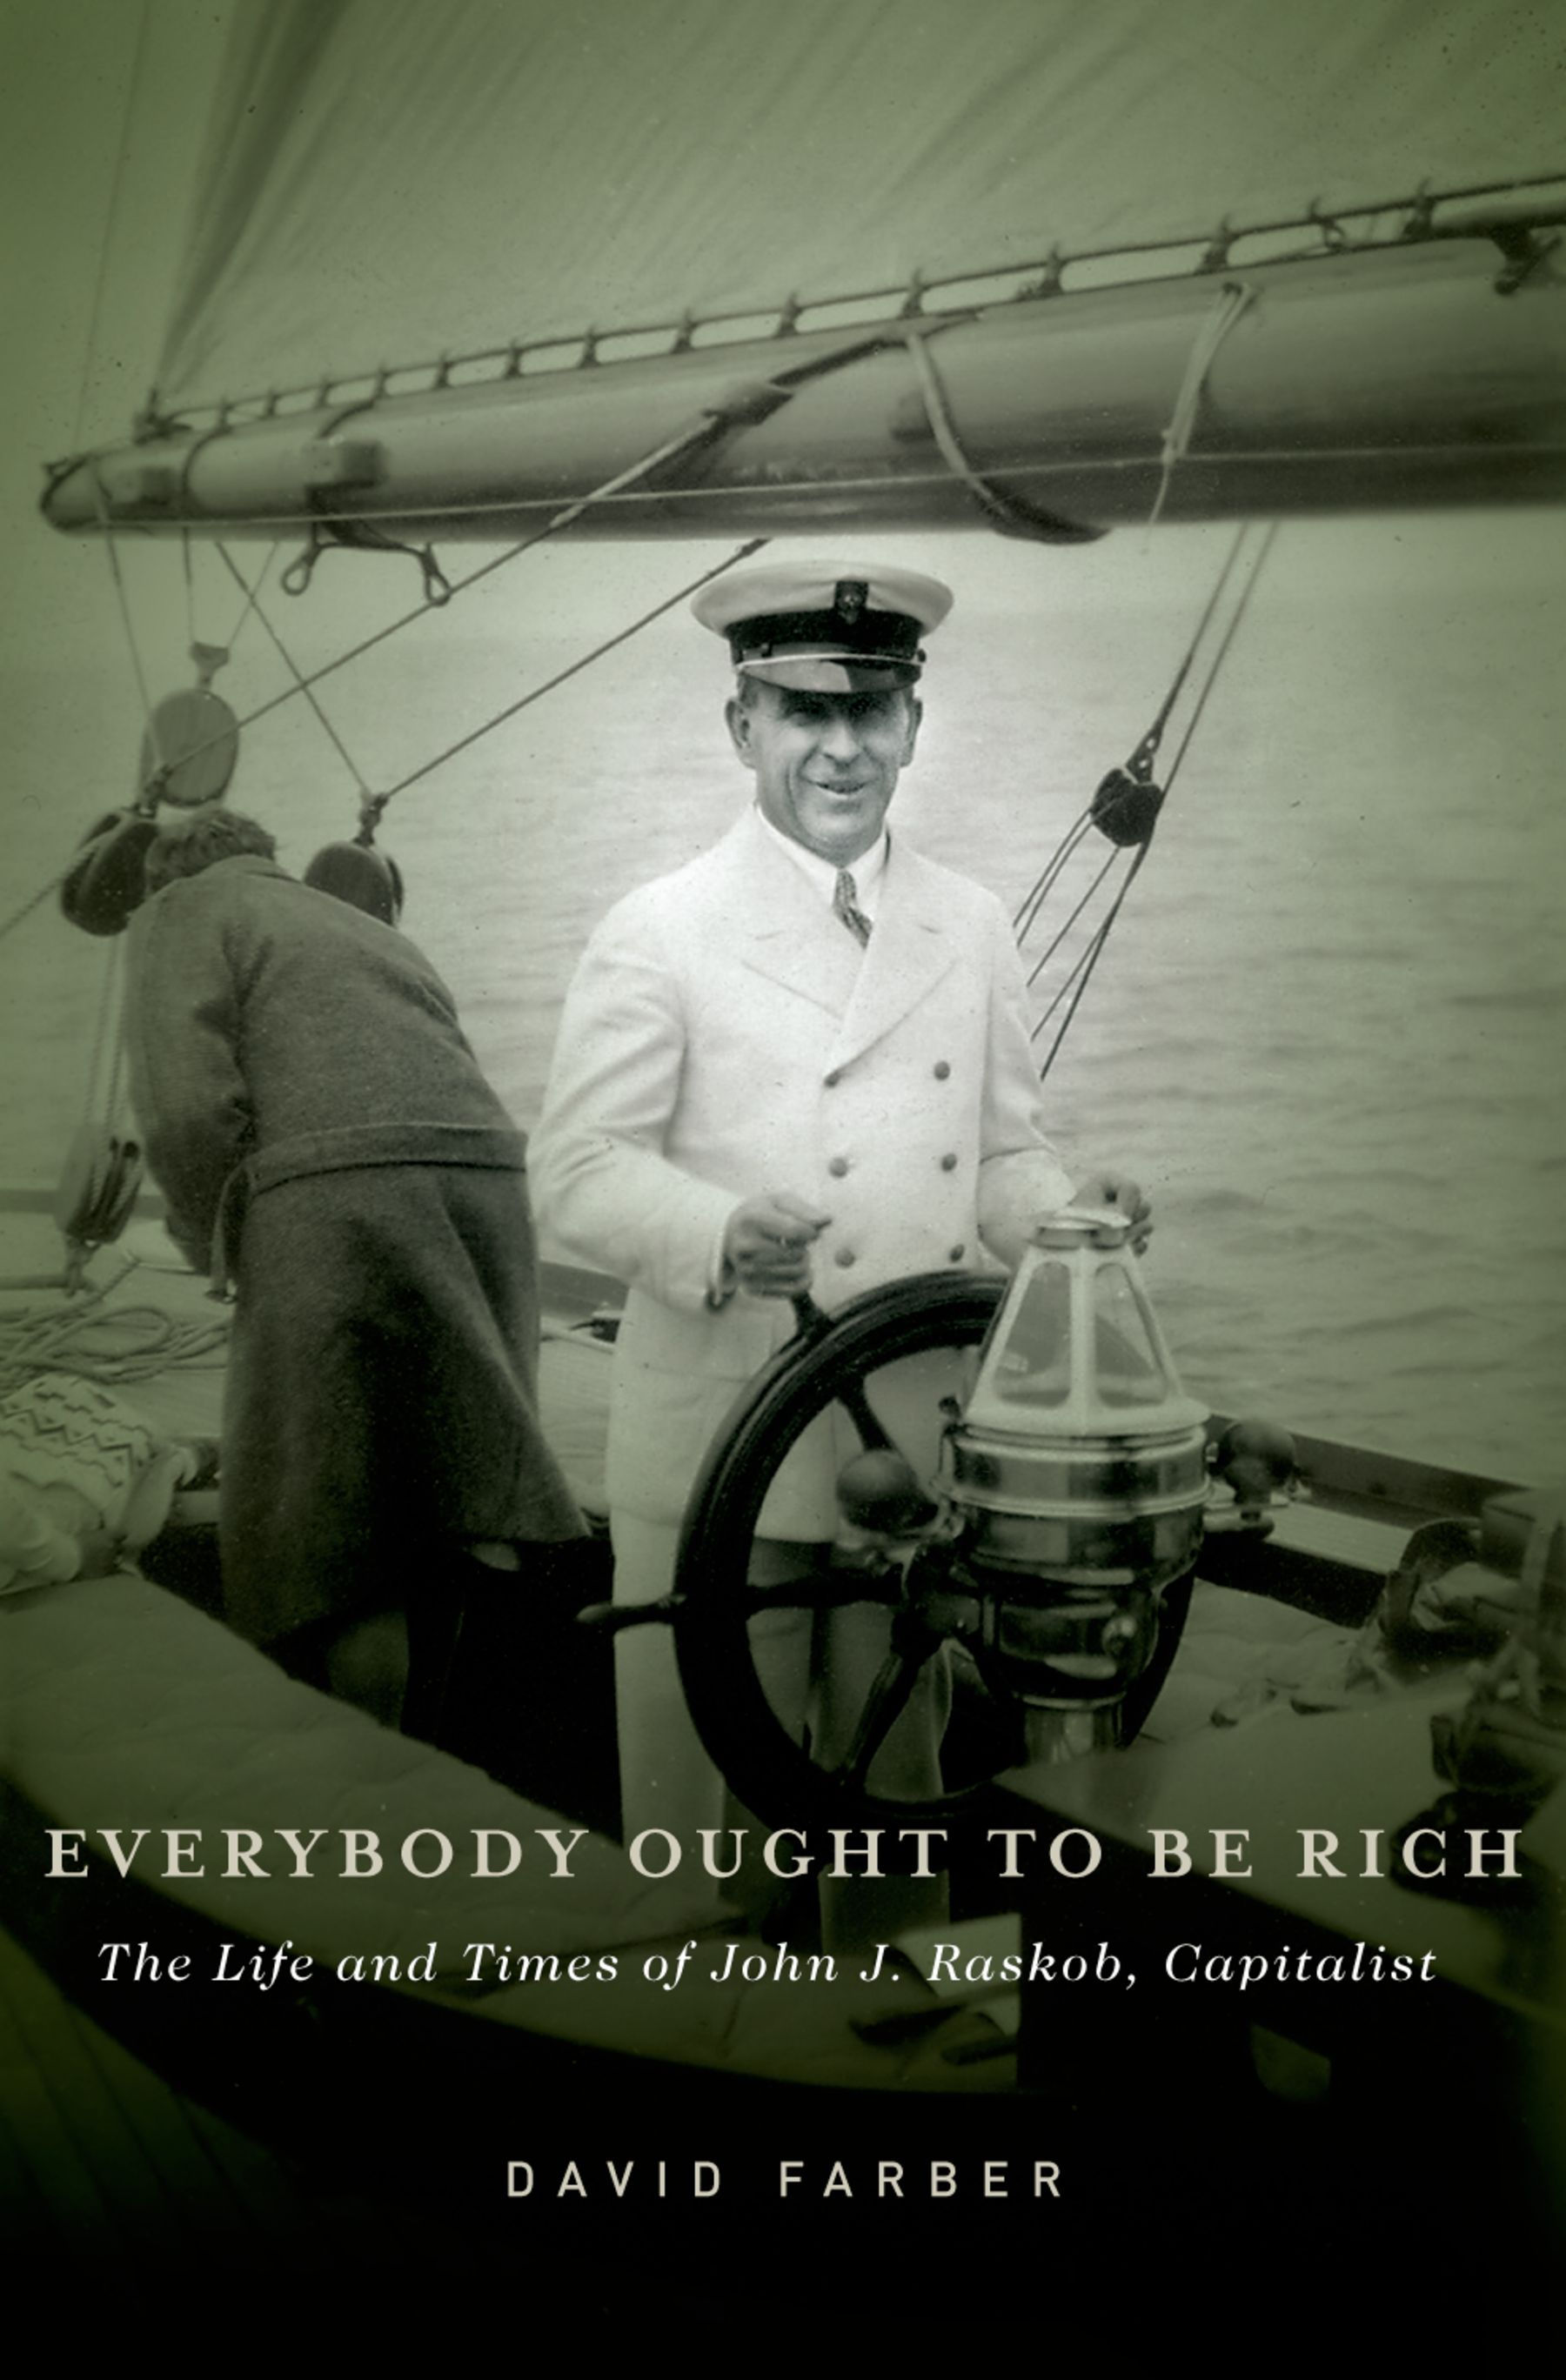 "Everybody Ought To Be Rich: The Life and Times of John J. Raskob, Capitalist"